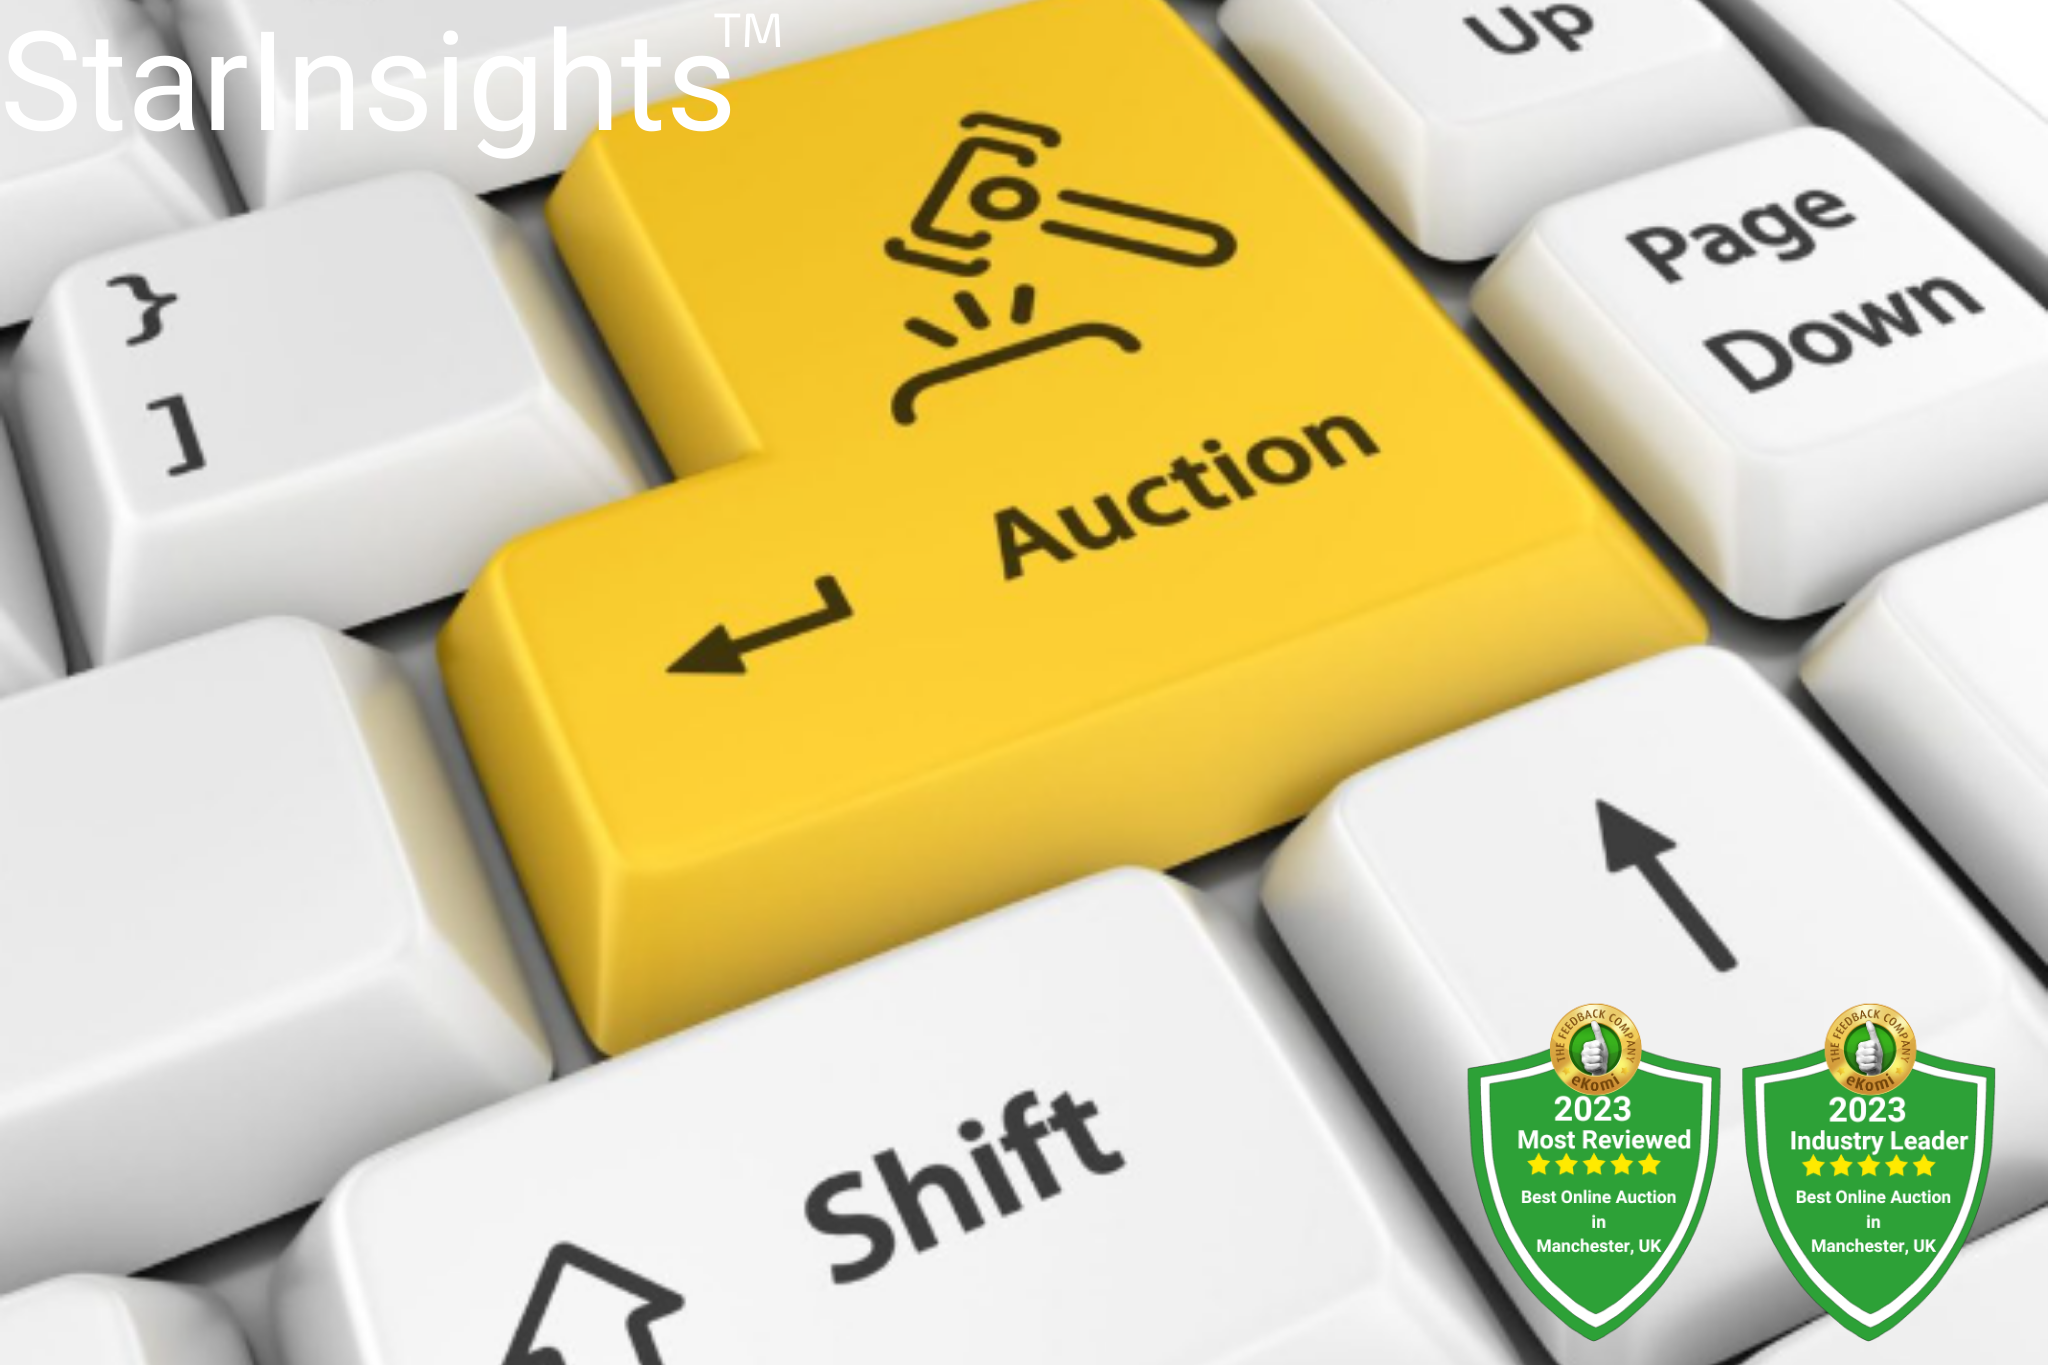 The Best Online Auction In Manchester